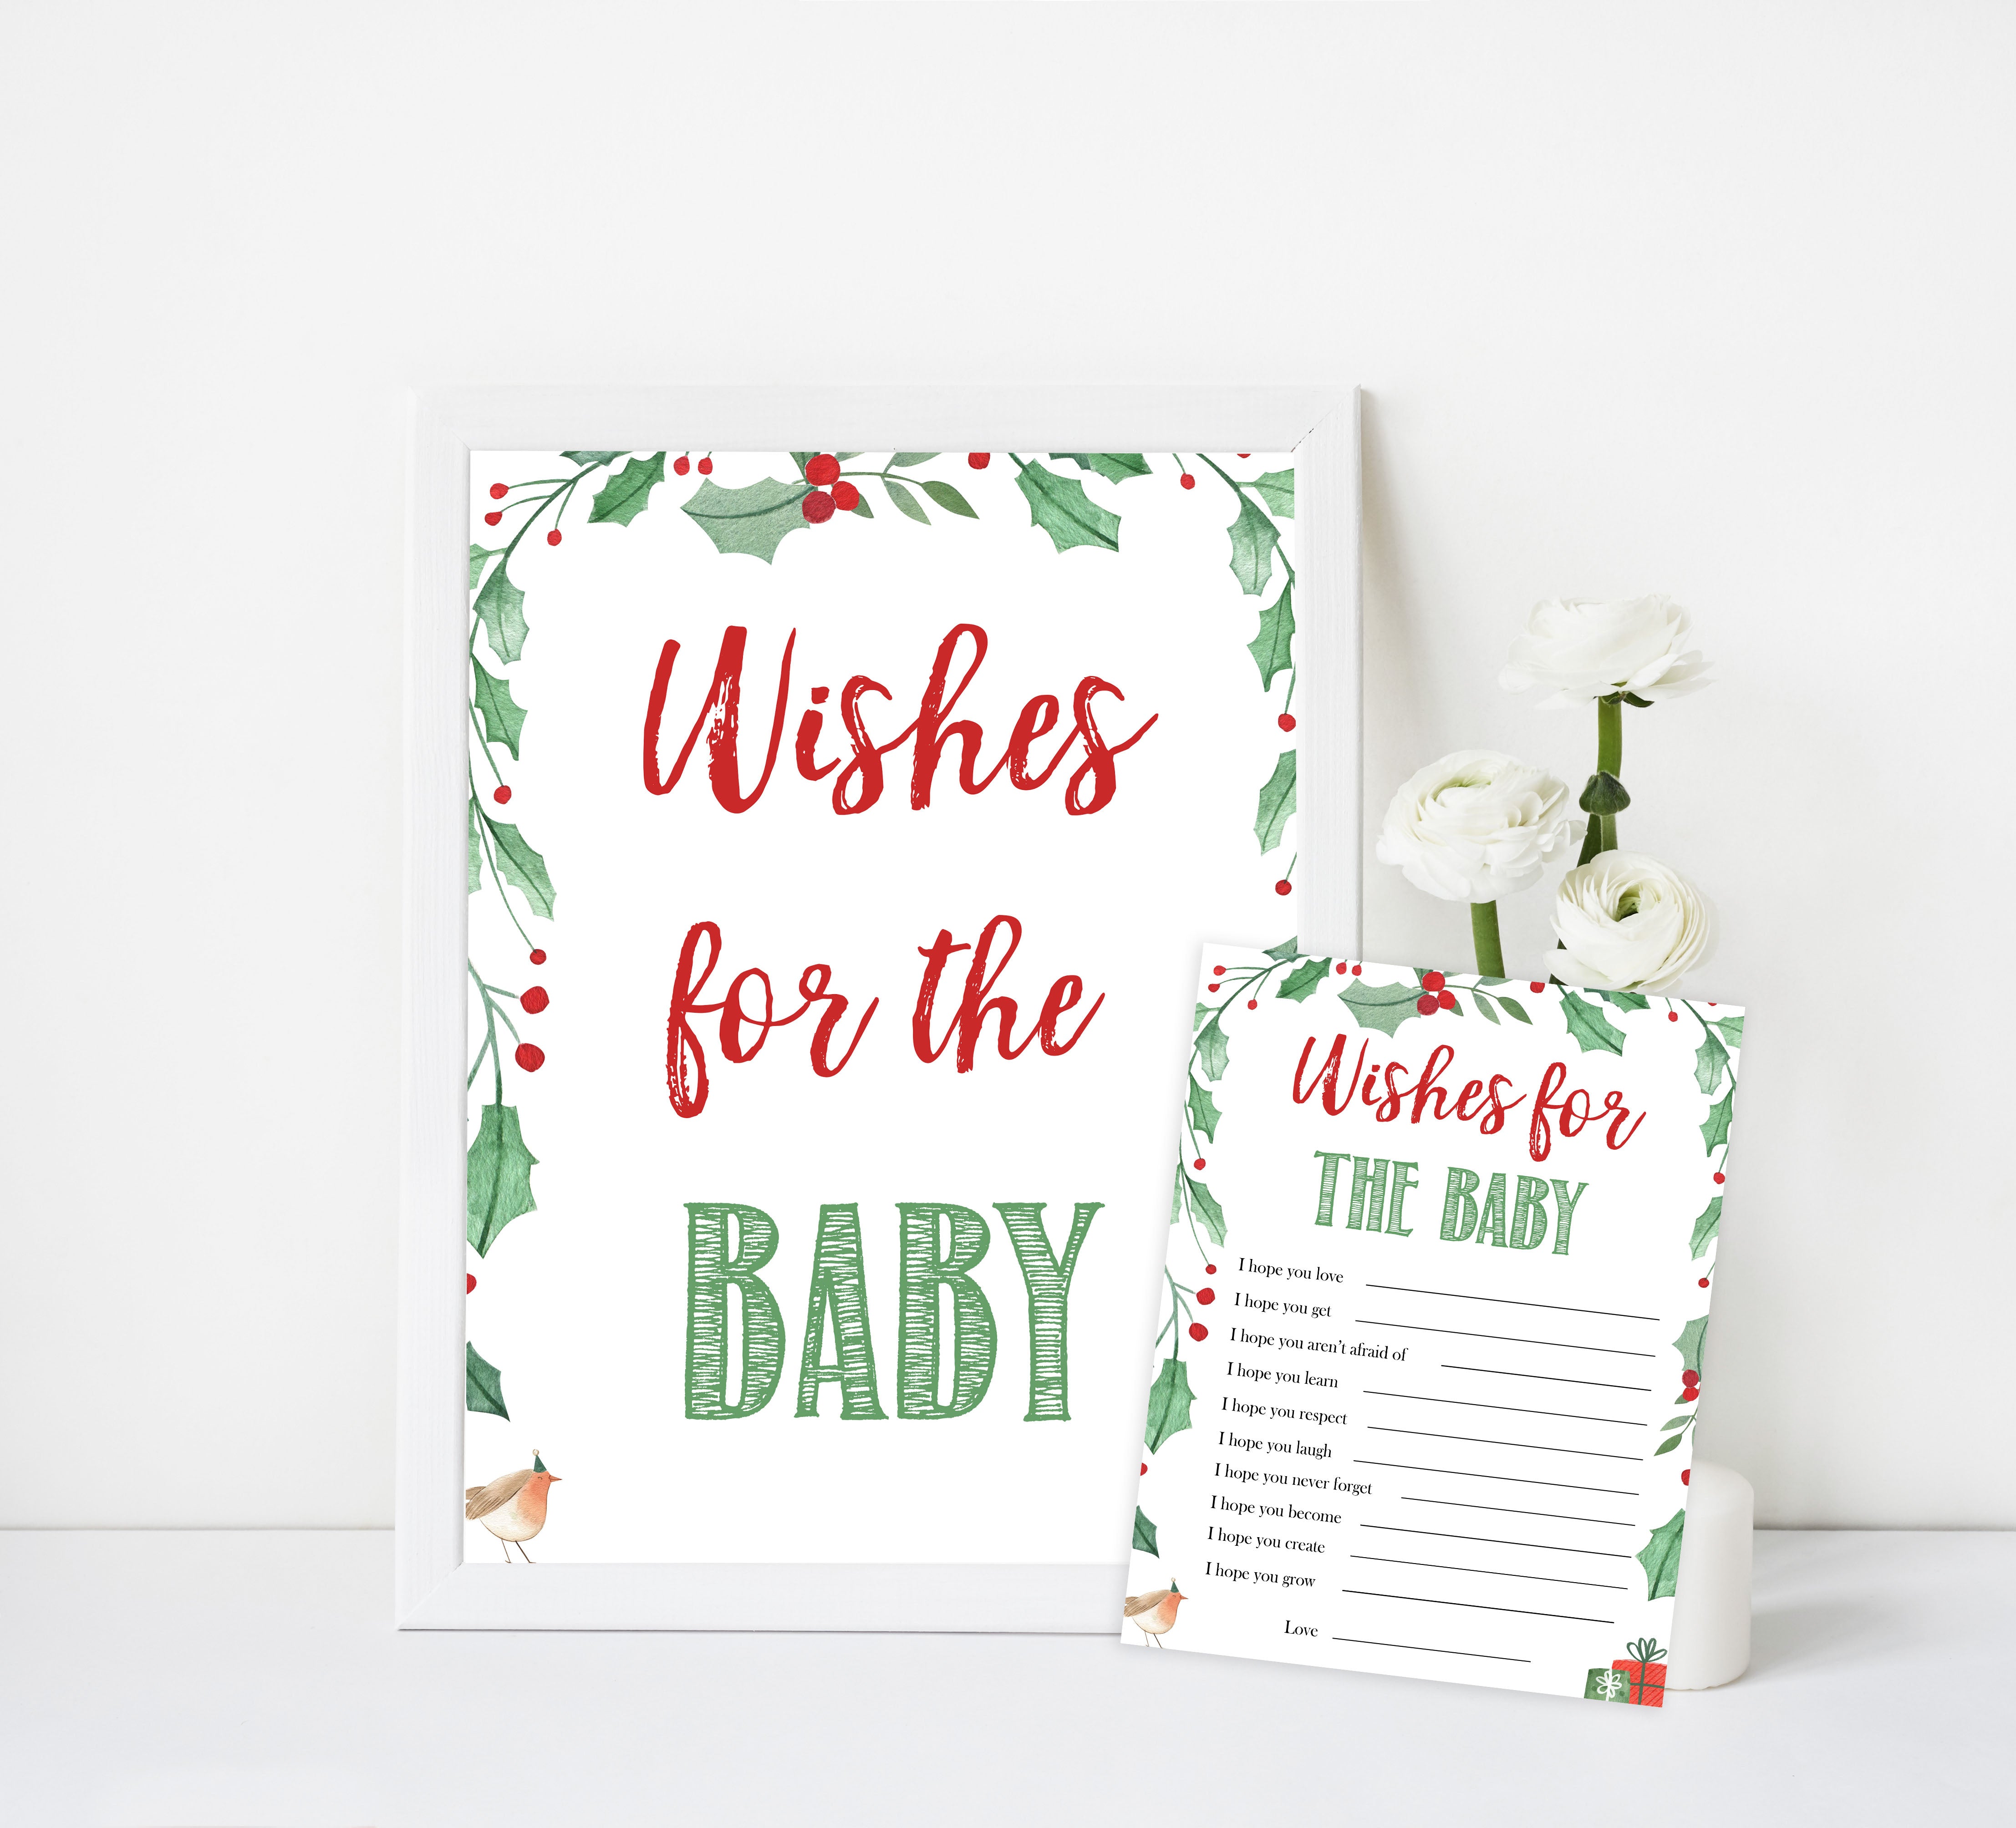 Christmas baby shower games, wishes for the baby, festive baby shower games, best baby shower games, top 10 baby games, baby shower ideas, baby shower games